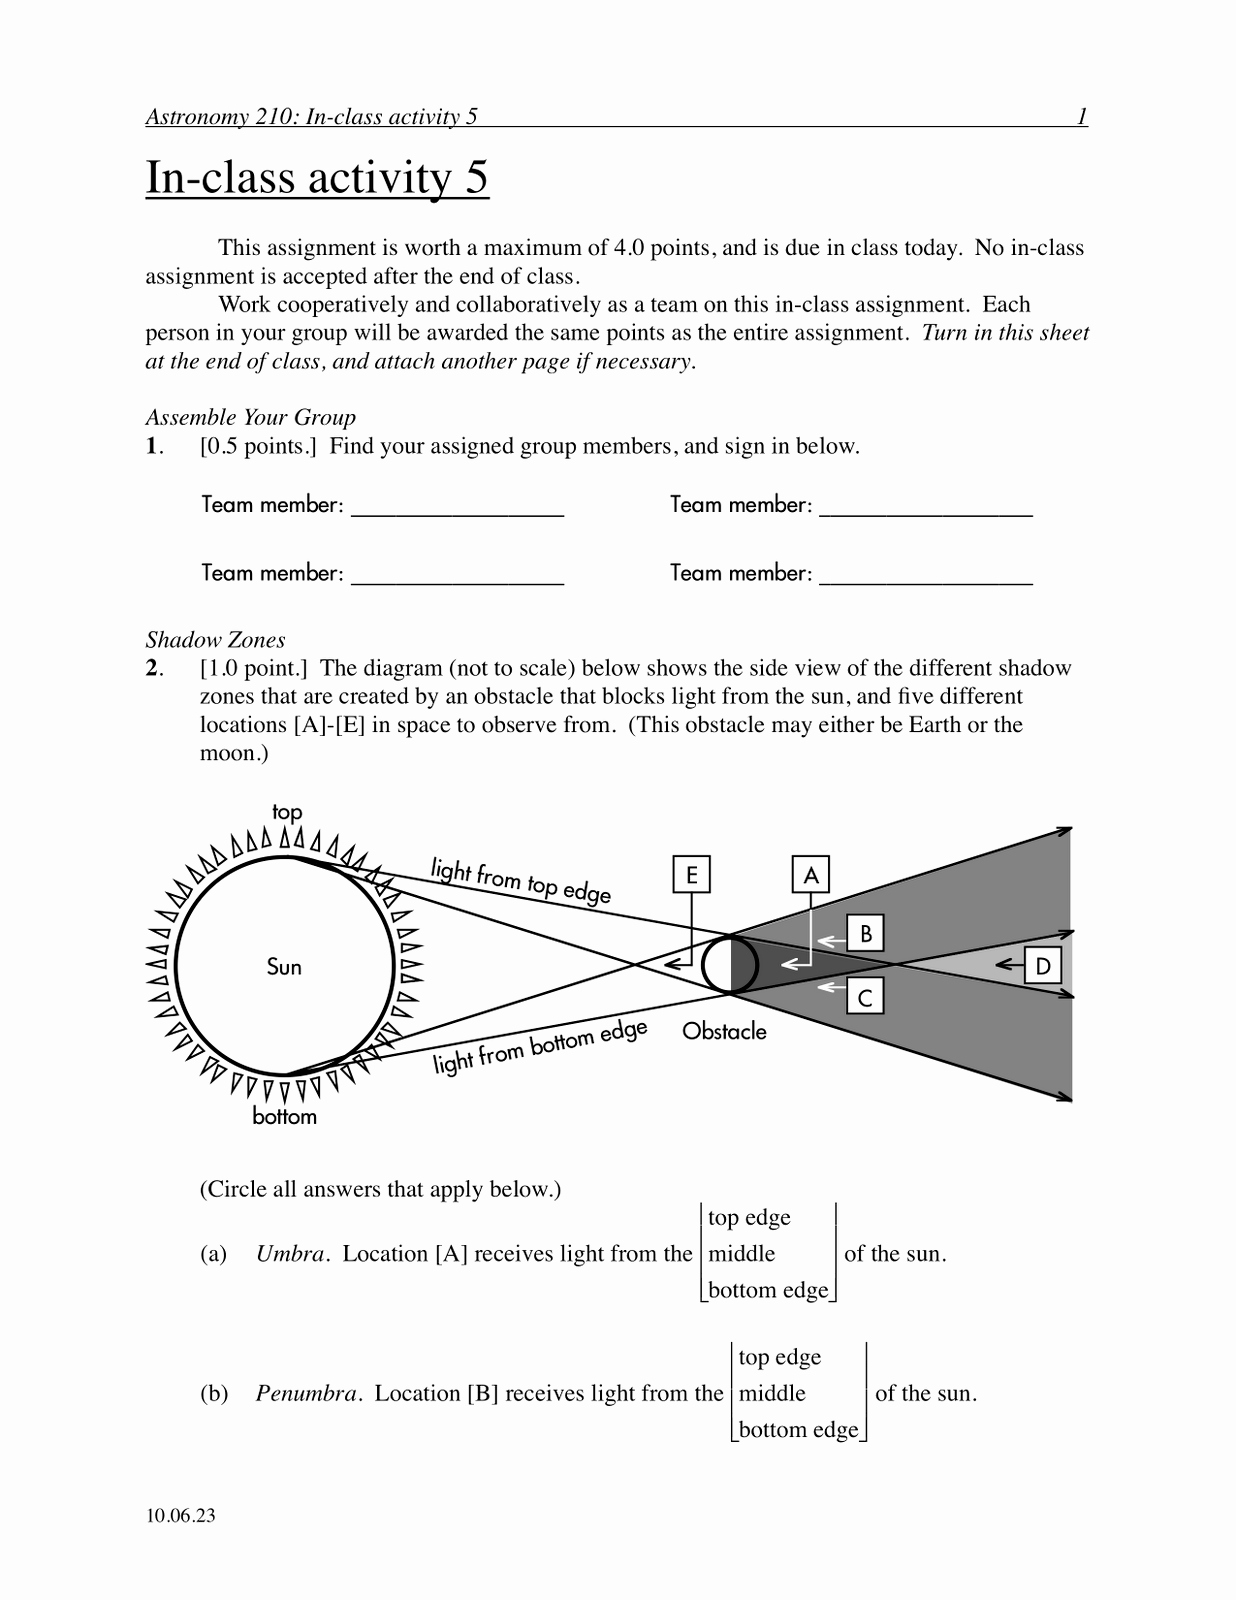 Solar and Lunar Eclipses Worksheet New Moon Eclipse Worksheet Gallery